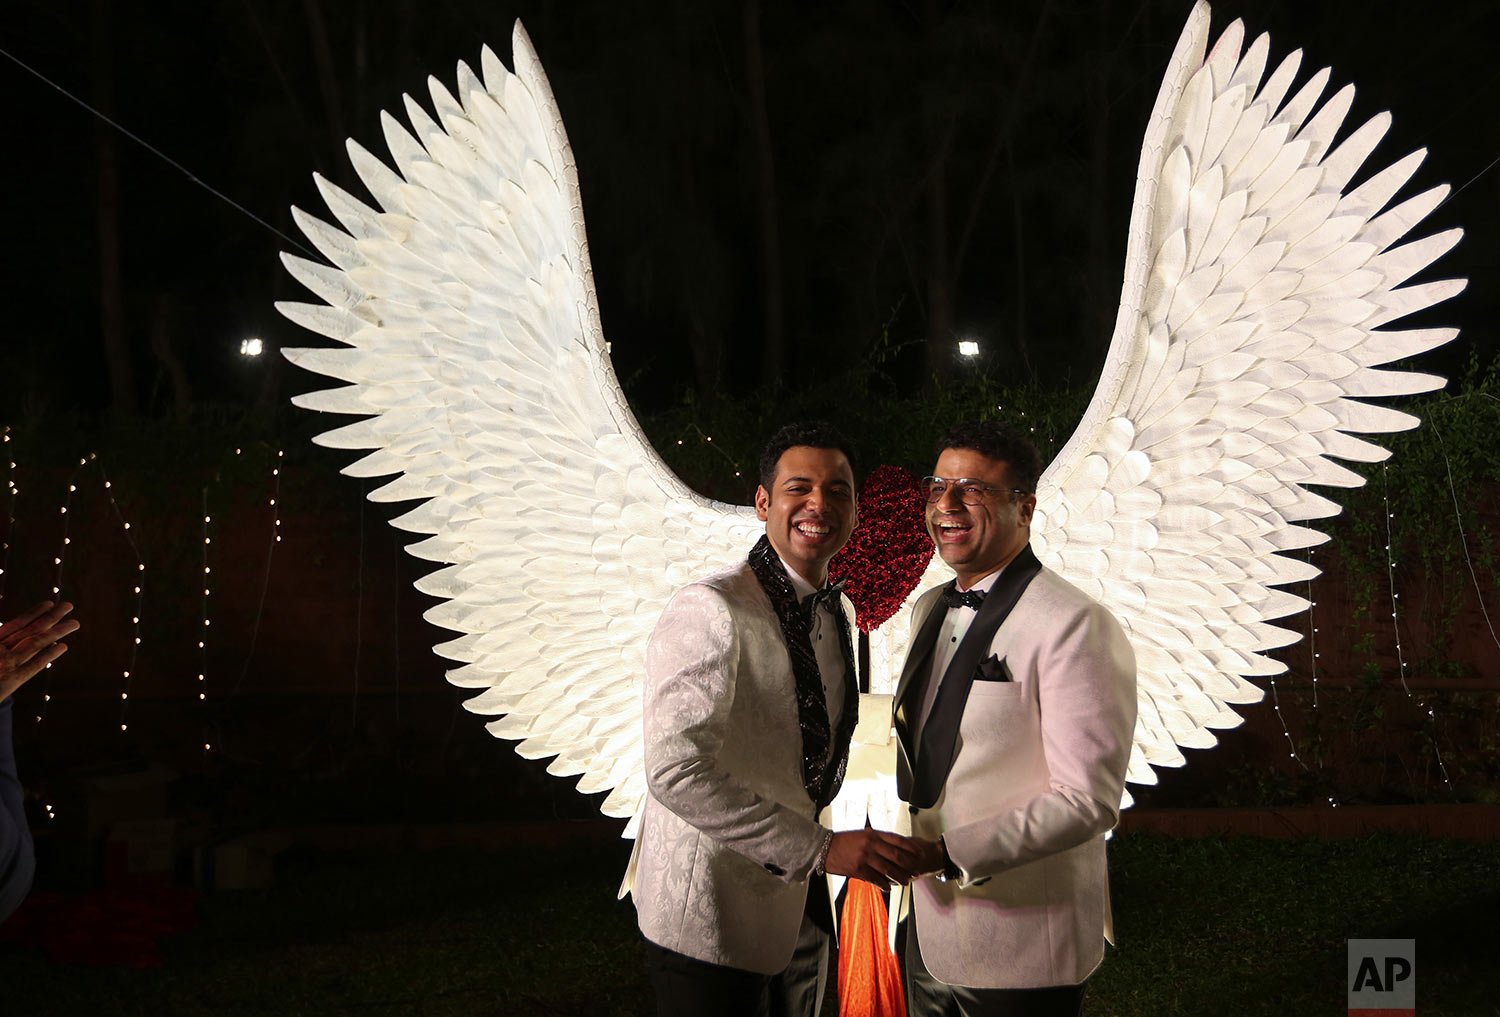  Indian gay couple Supriyo Chakraborty, left, and Abhay Dang, share a happy moment during their promising ceremony for acceptance on the outskirts of Hyderabad, India, Saturday, Dec.18, 2021. (AP Photo/Mahesh Kumar A.) 